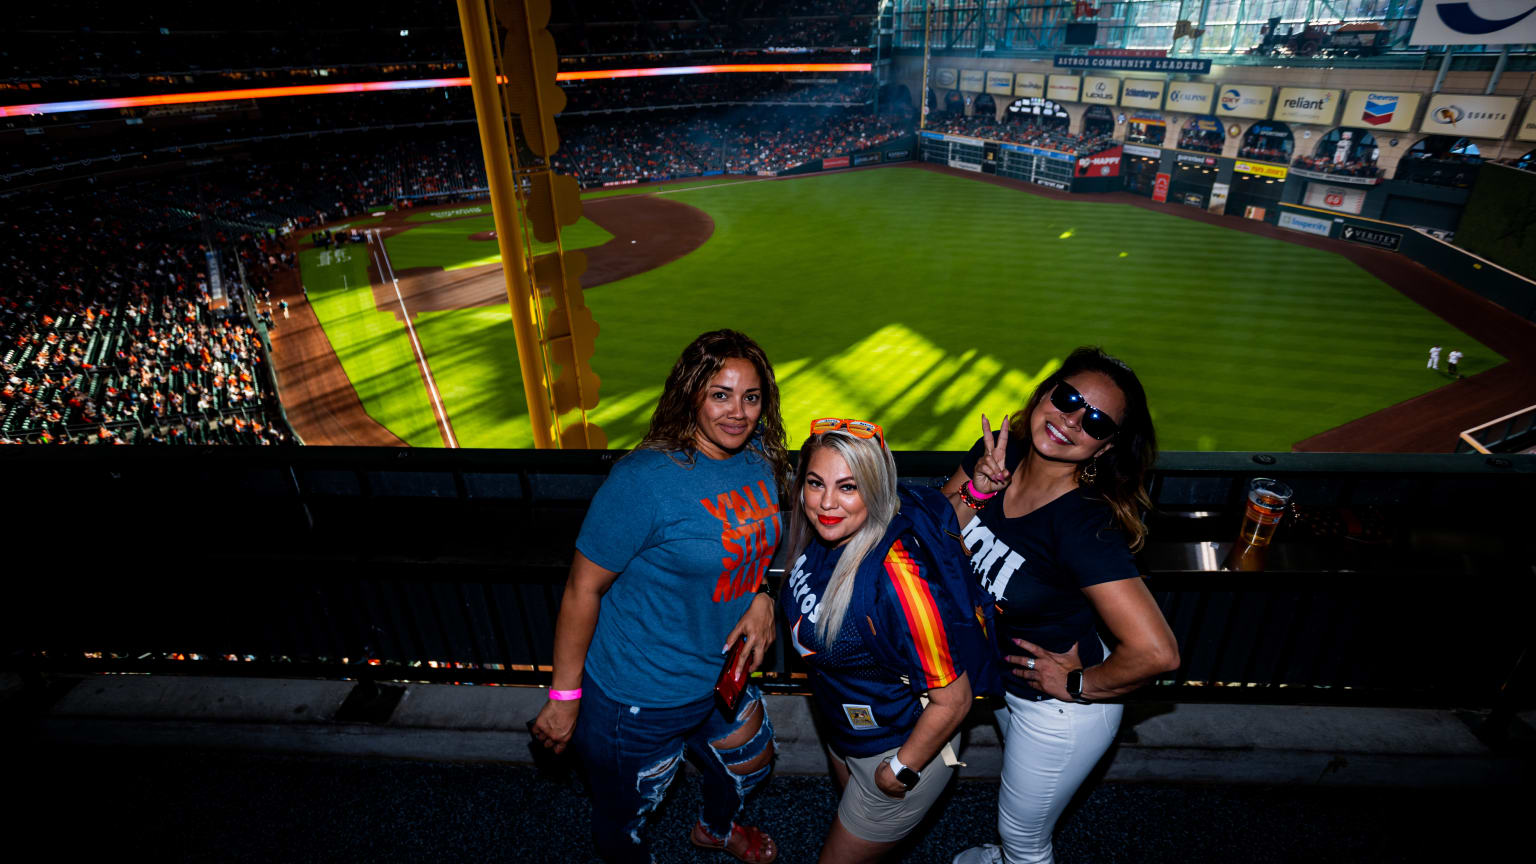 Is There Still a Place for Ladies Night in Baseball?